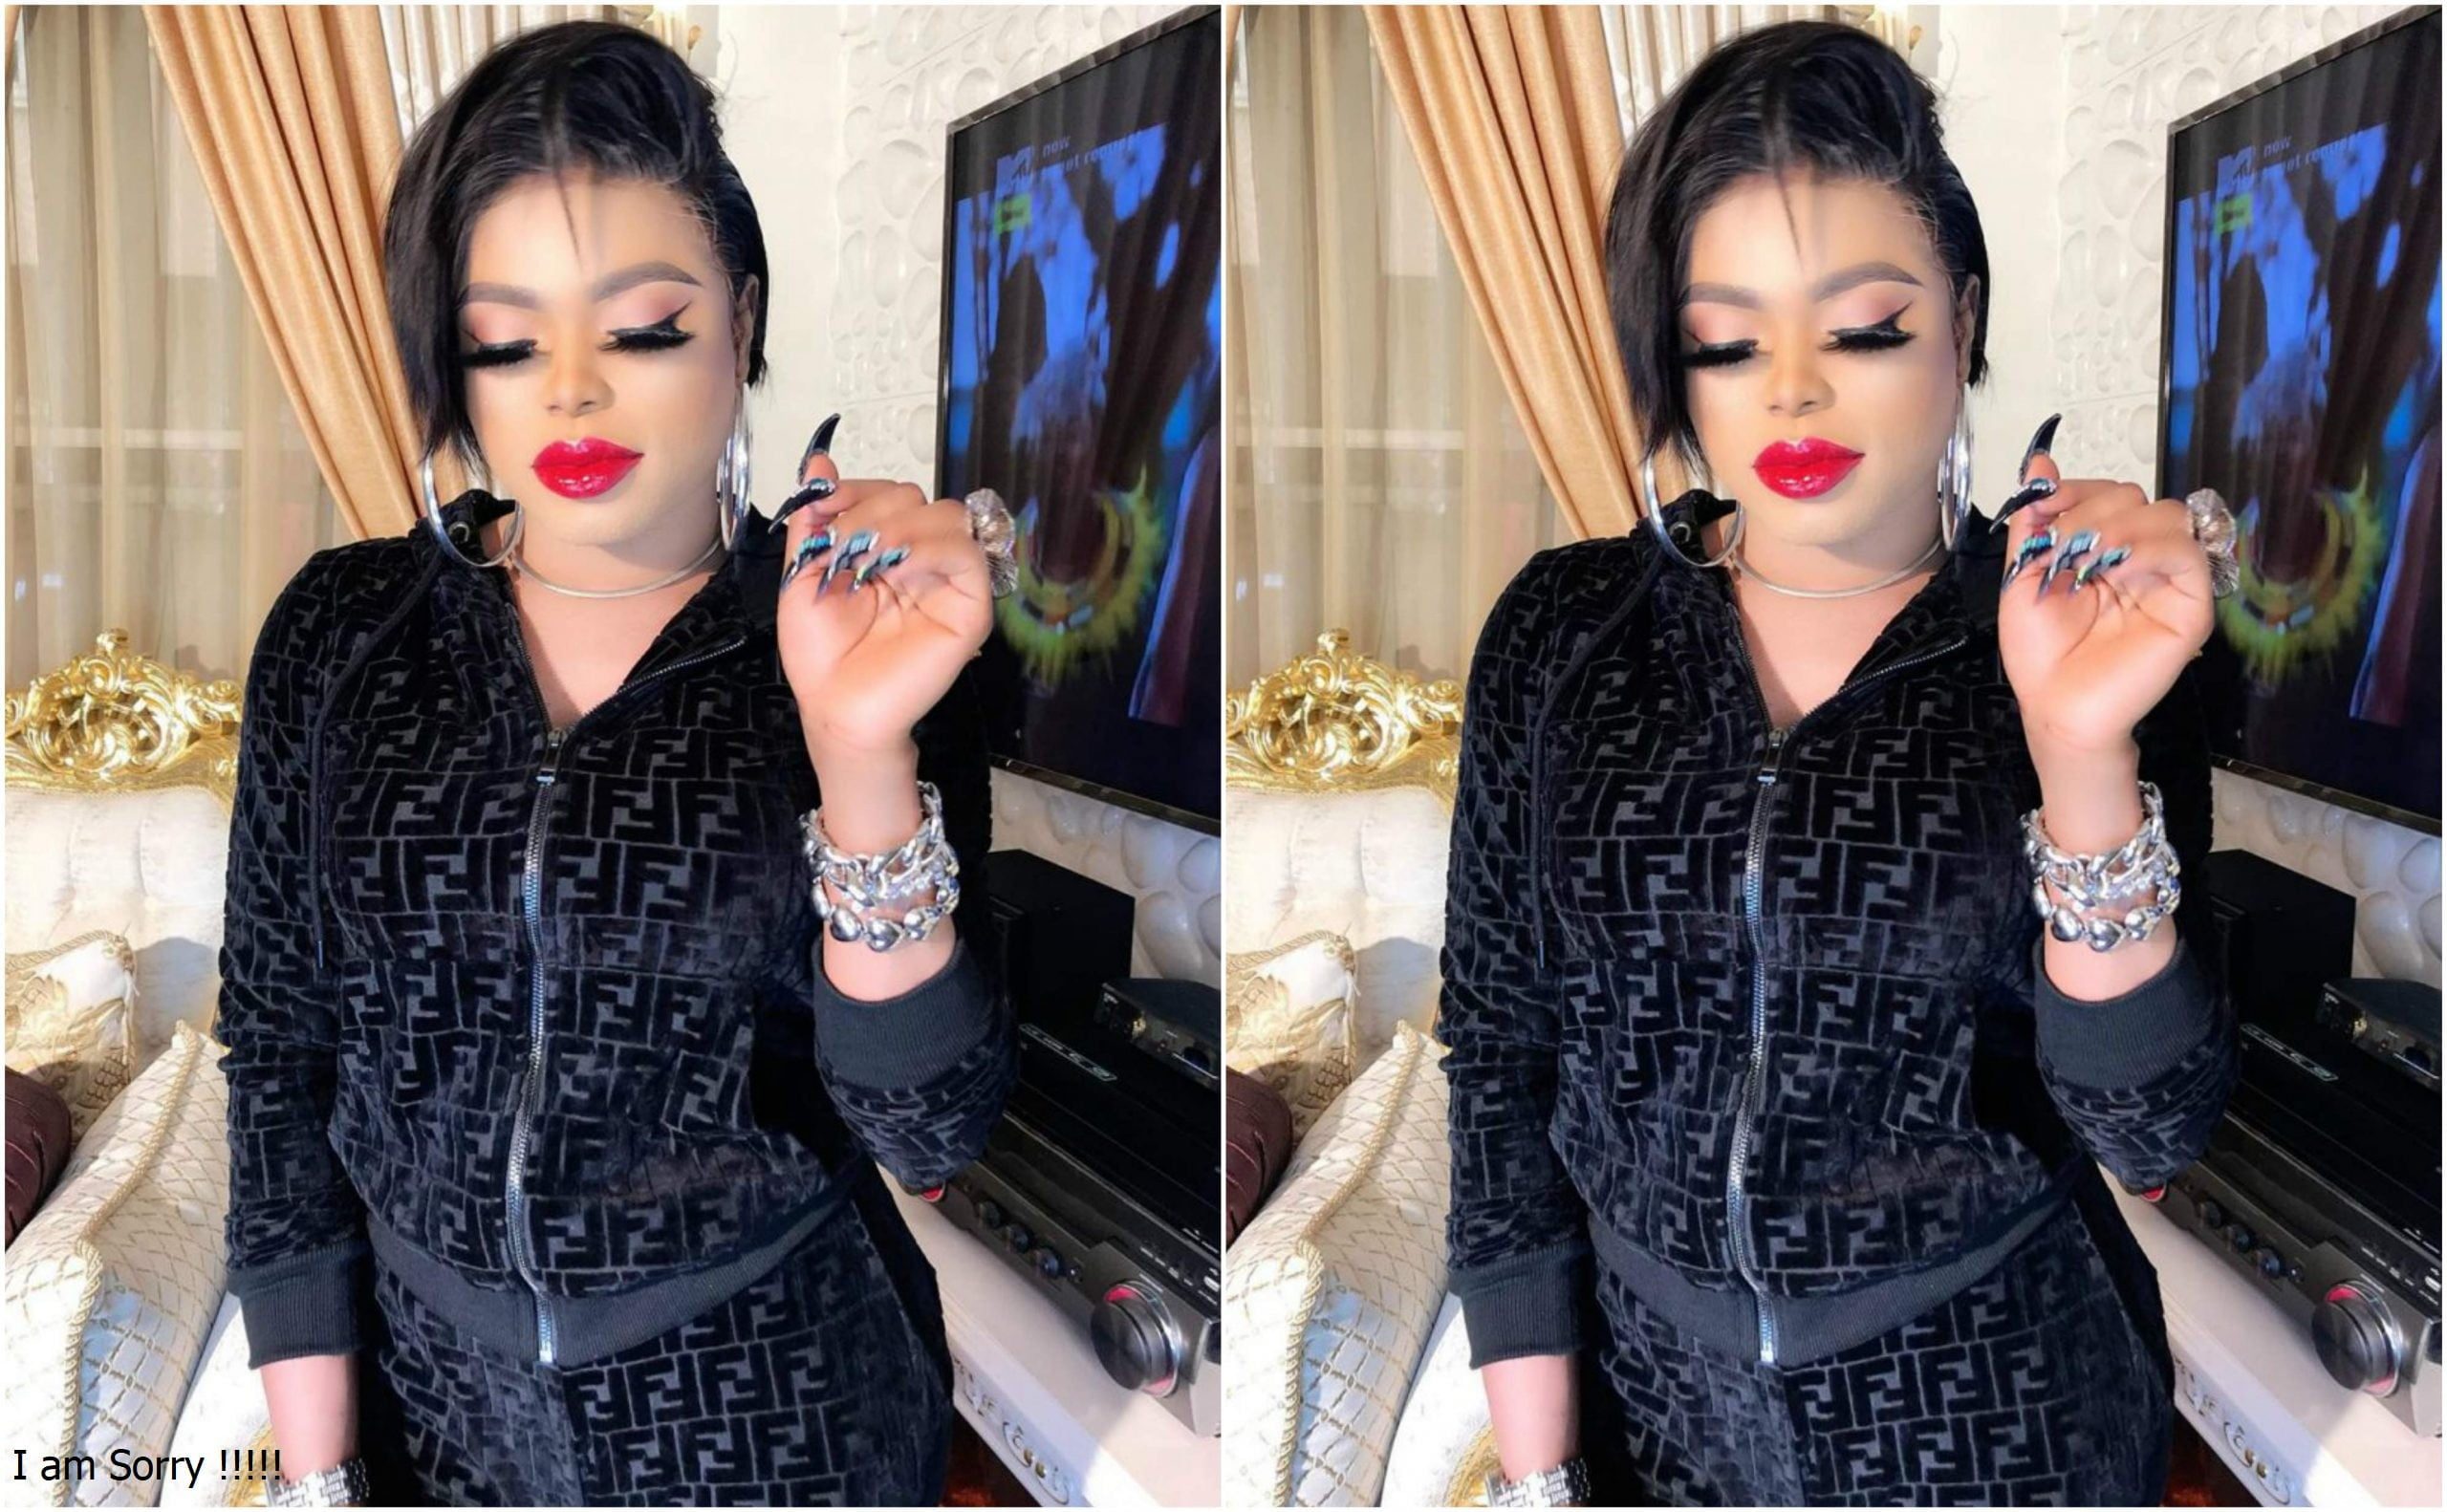 "I Will Quickly Remove My Wig, Eyelashes, And Nails When I Hear Jesus Christ Is Coming" - Bobrisky Claims